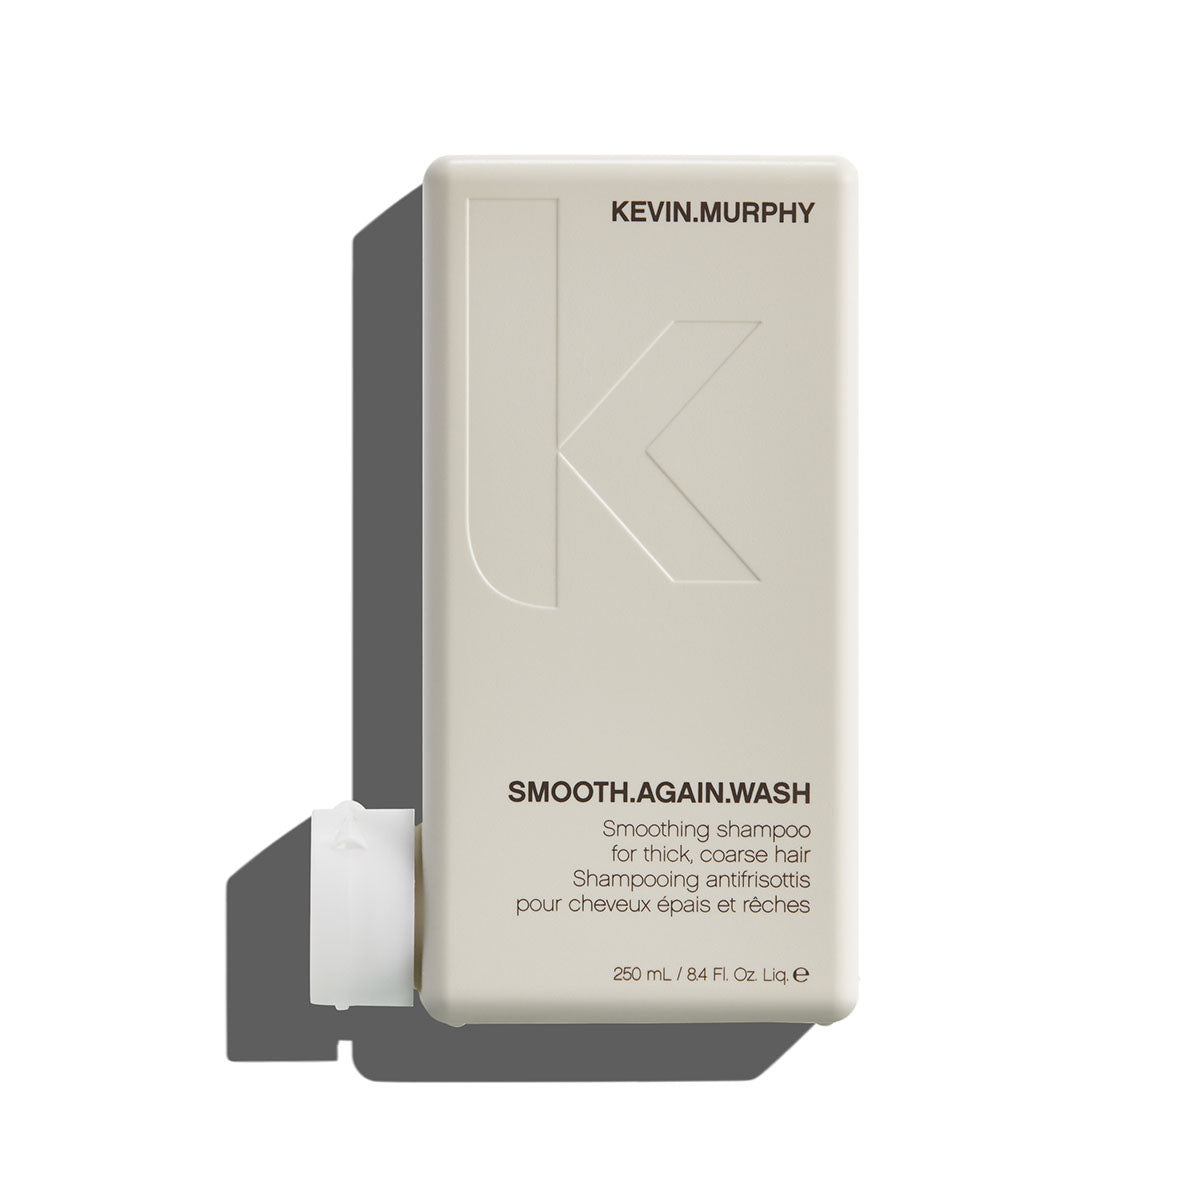 KEVIN.MURPHY Smooth Again Wash 250ml